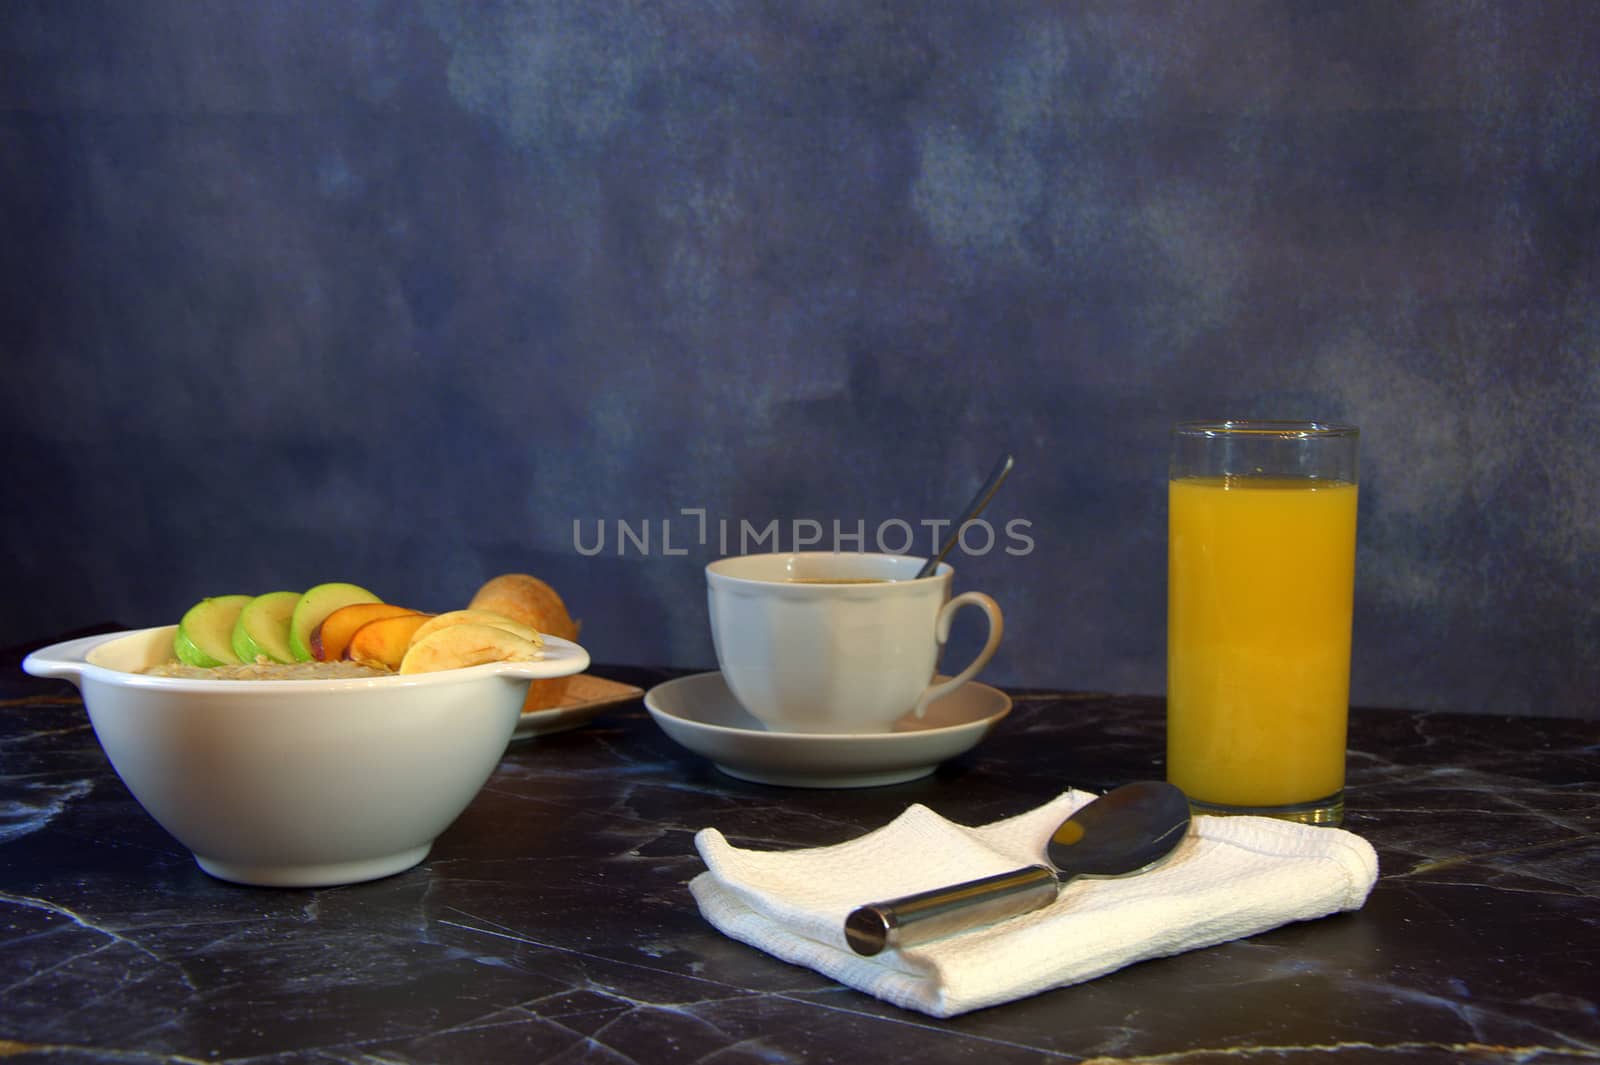 Proper breakfast, a plate of oatmeal with fruit slices, a glass of orange juice, a cup of coffee and two croissants.